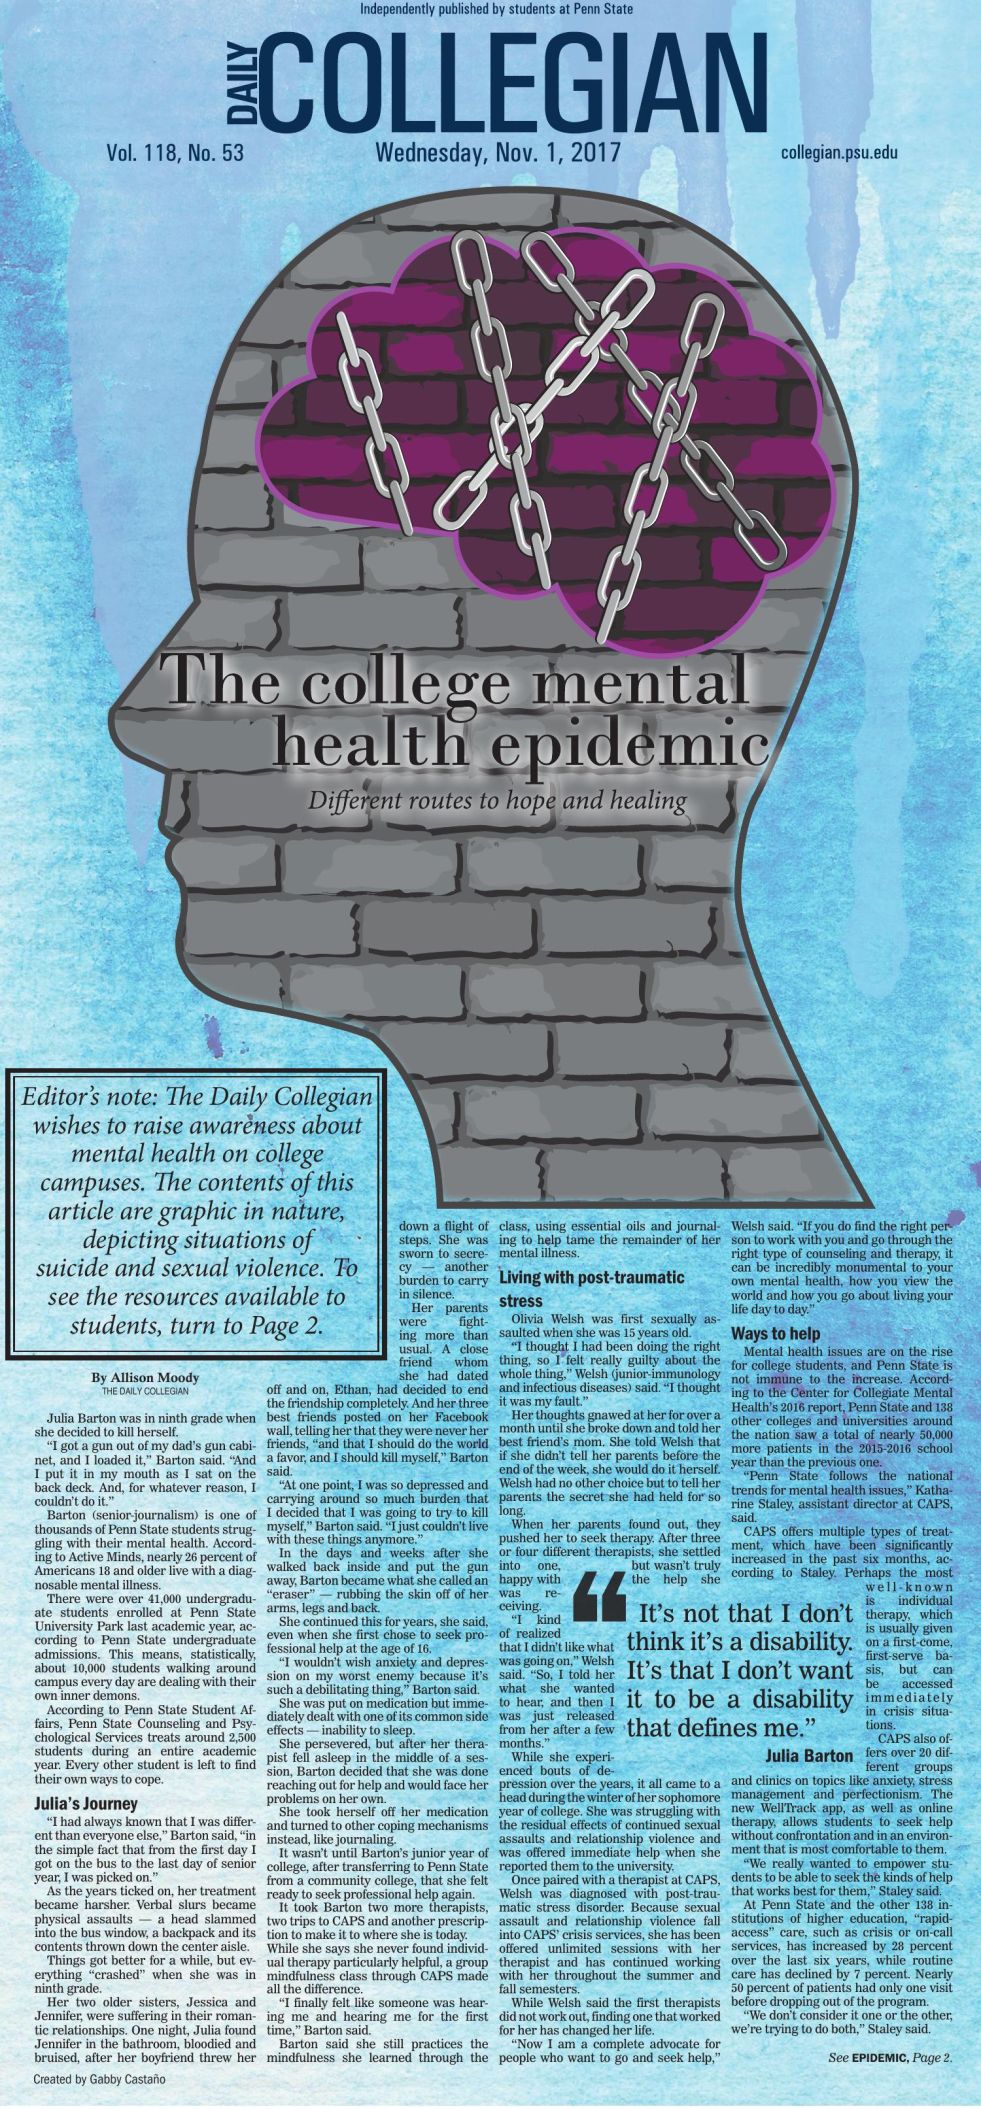 The Daily Collegian for Nov. 1, 2017